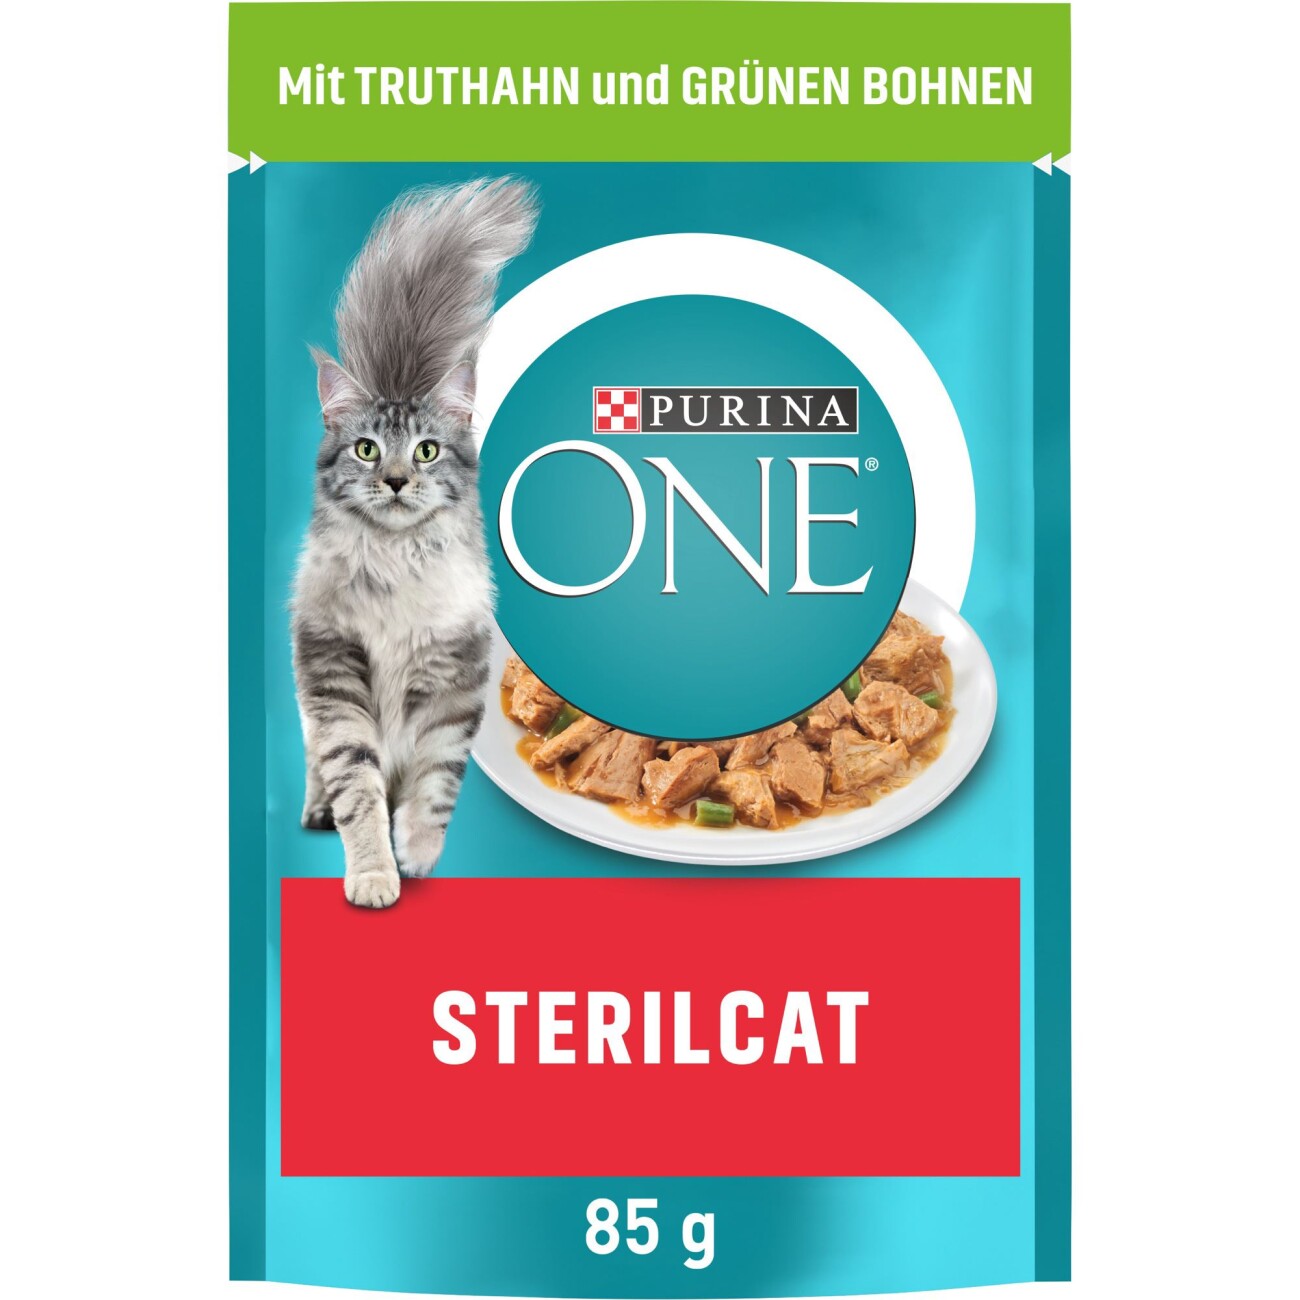 Promo Purina One à Toulouse ᐅ Achat Purina One pas cher à Toulouse